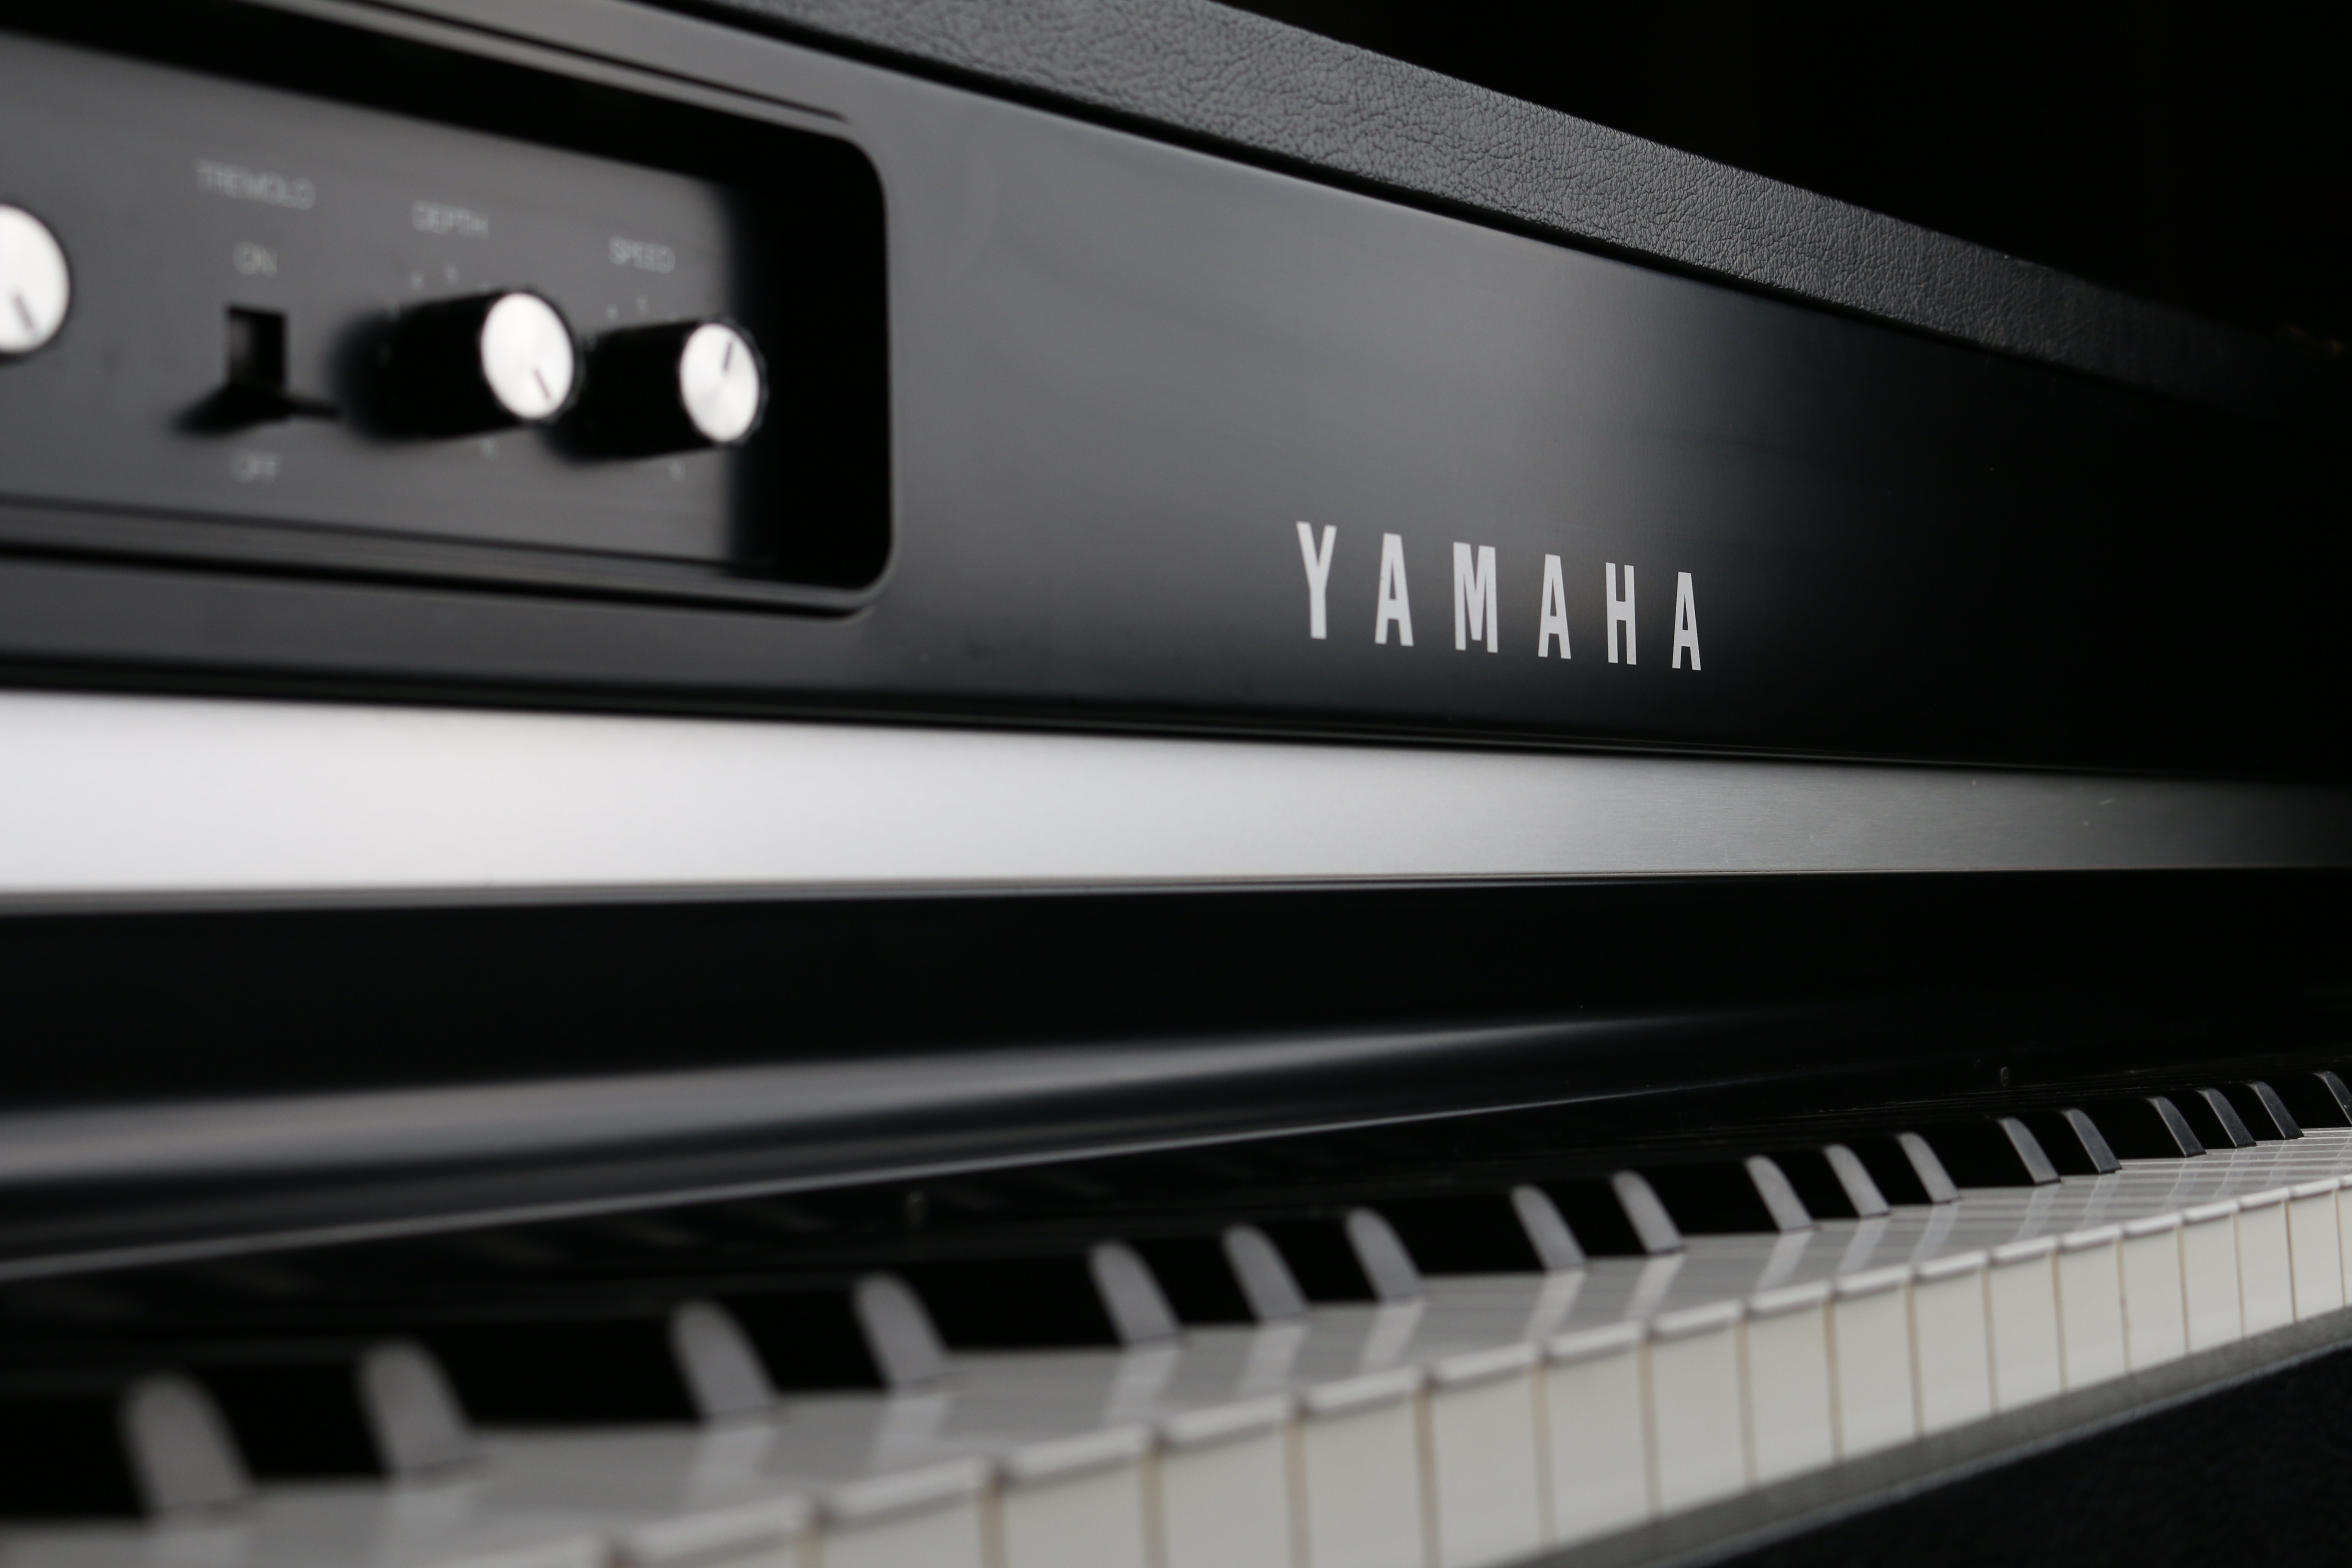 Keyboard Instrument Picture. Download Free Image